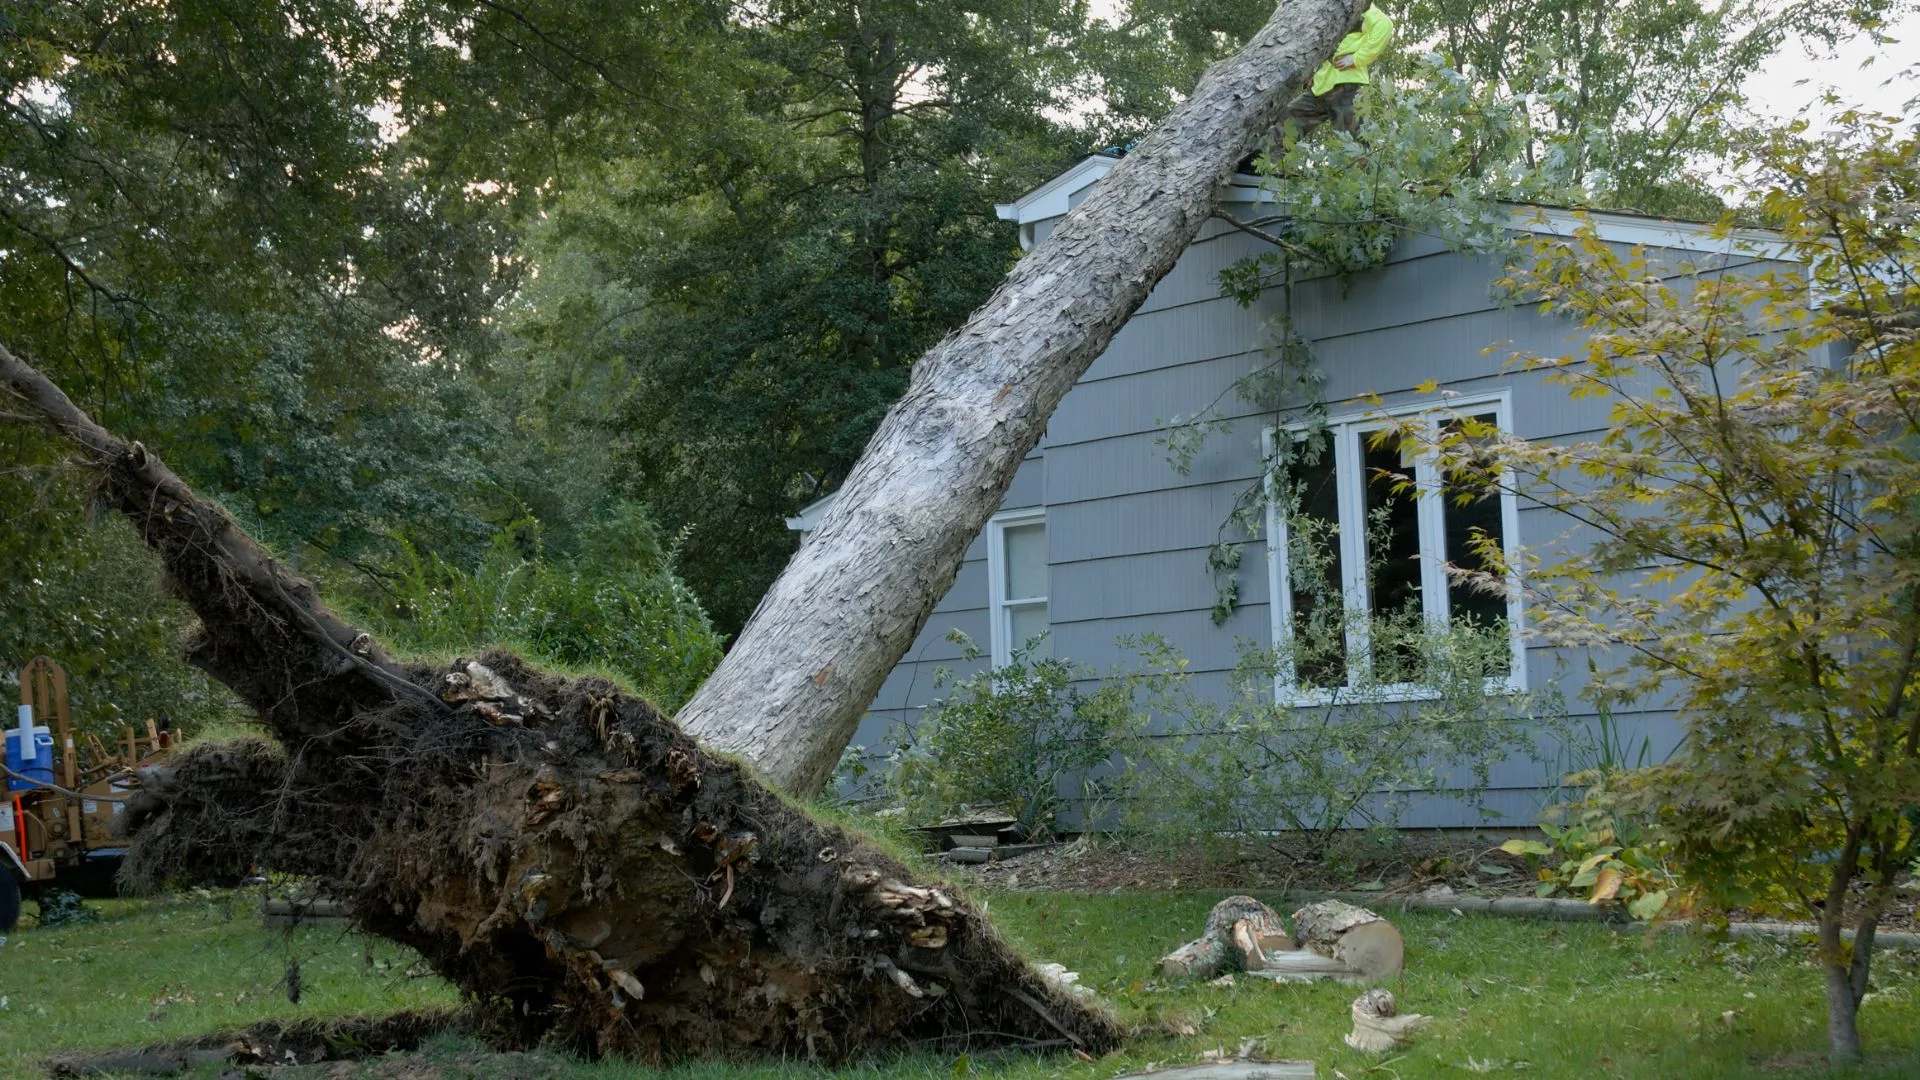 Image shows how wind uprooted a tree, damaging a nearby house.